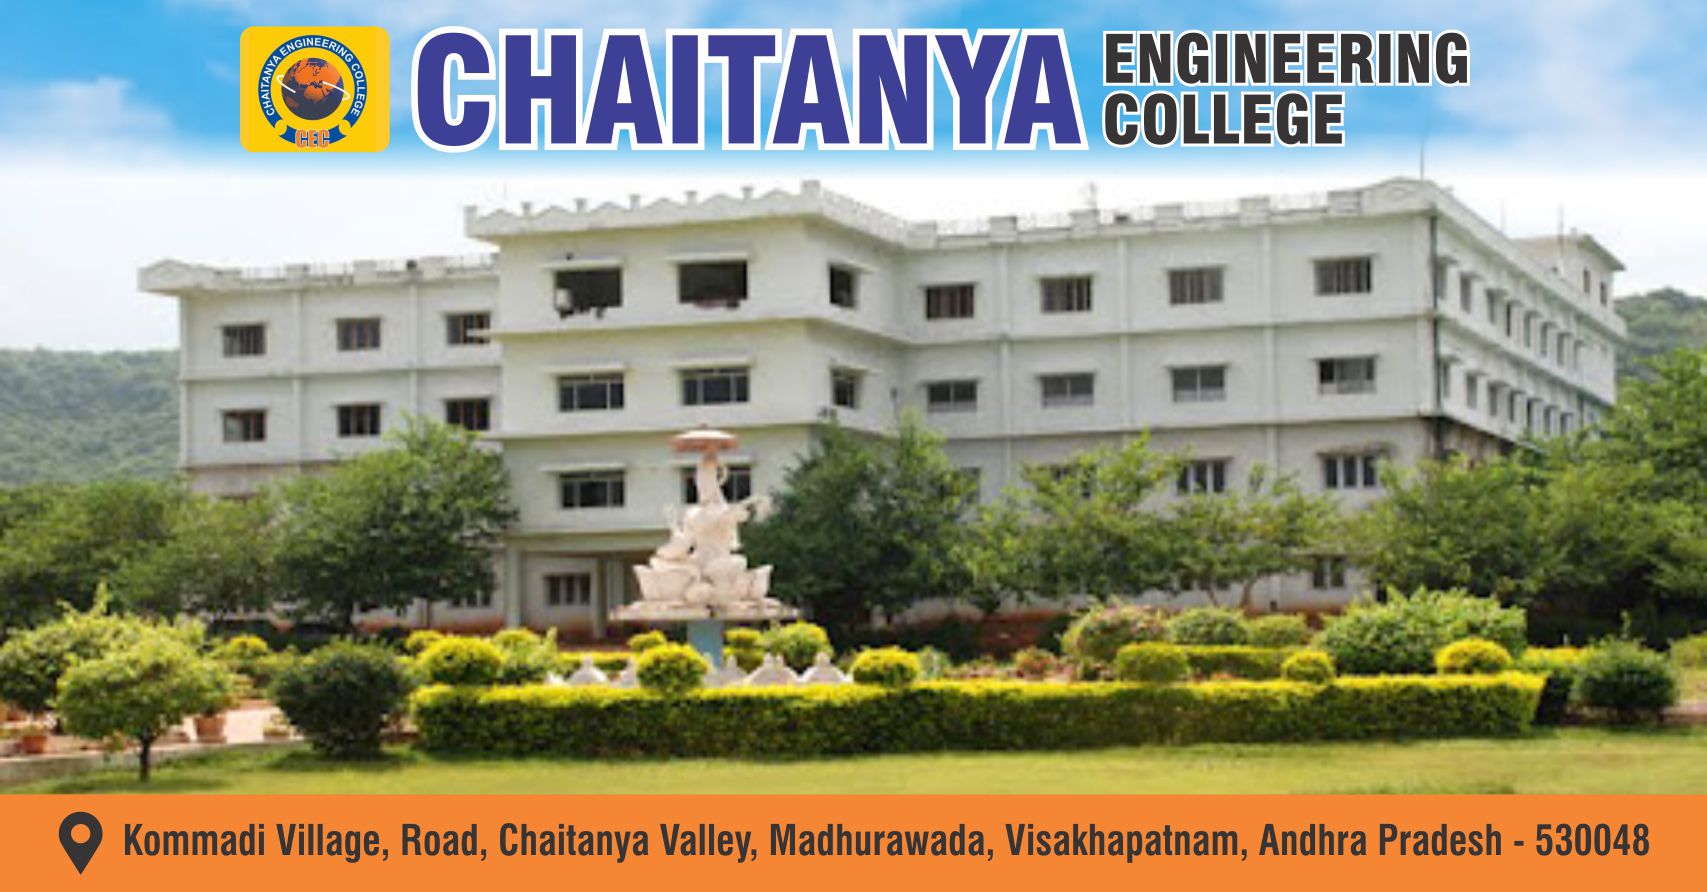 Out Side View of Chaitanya Engineering College